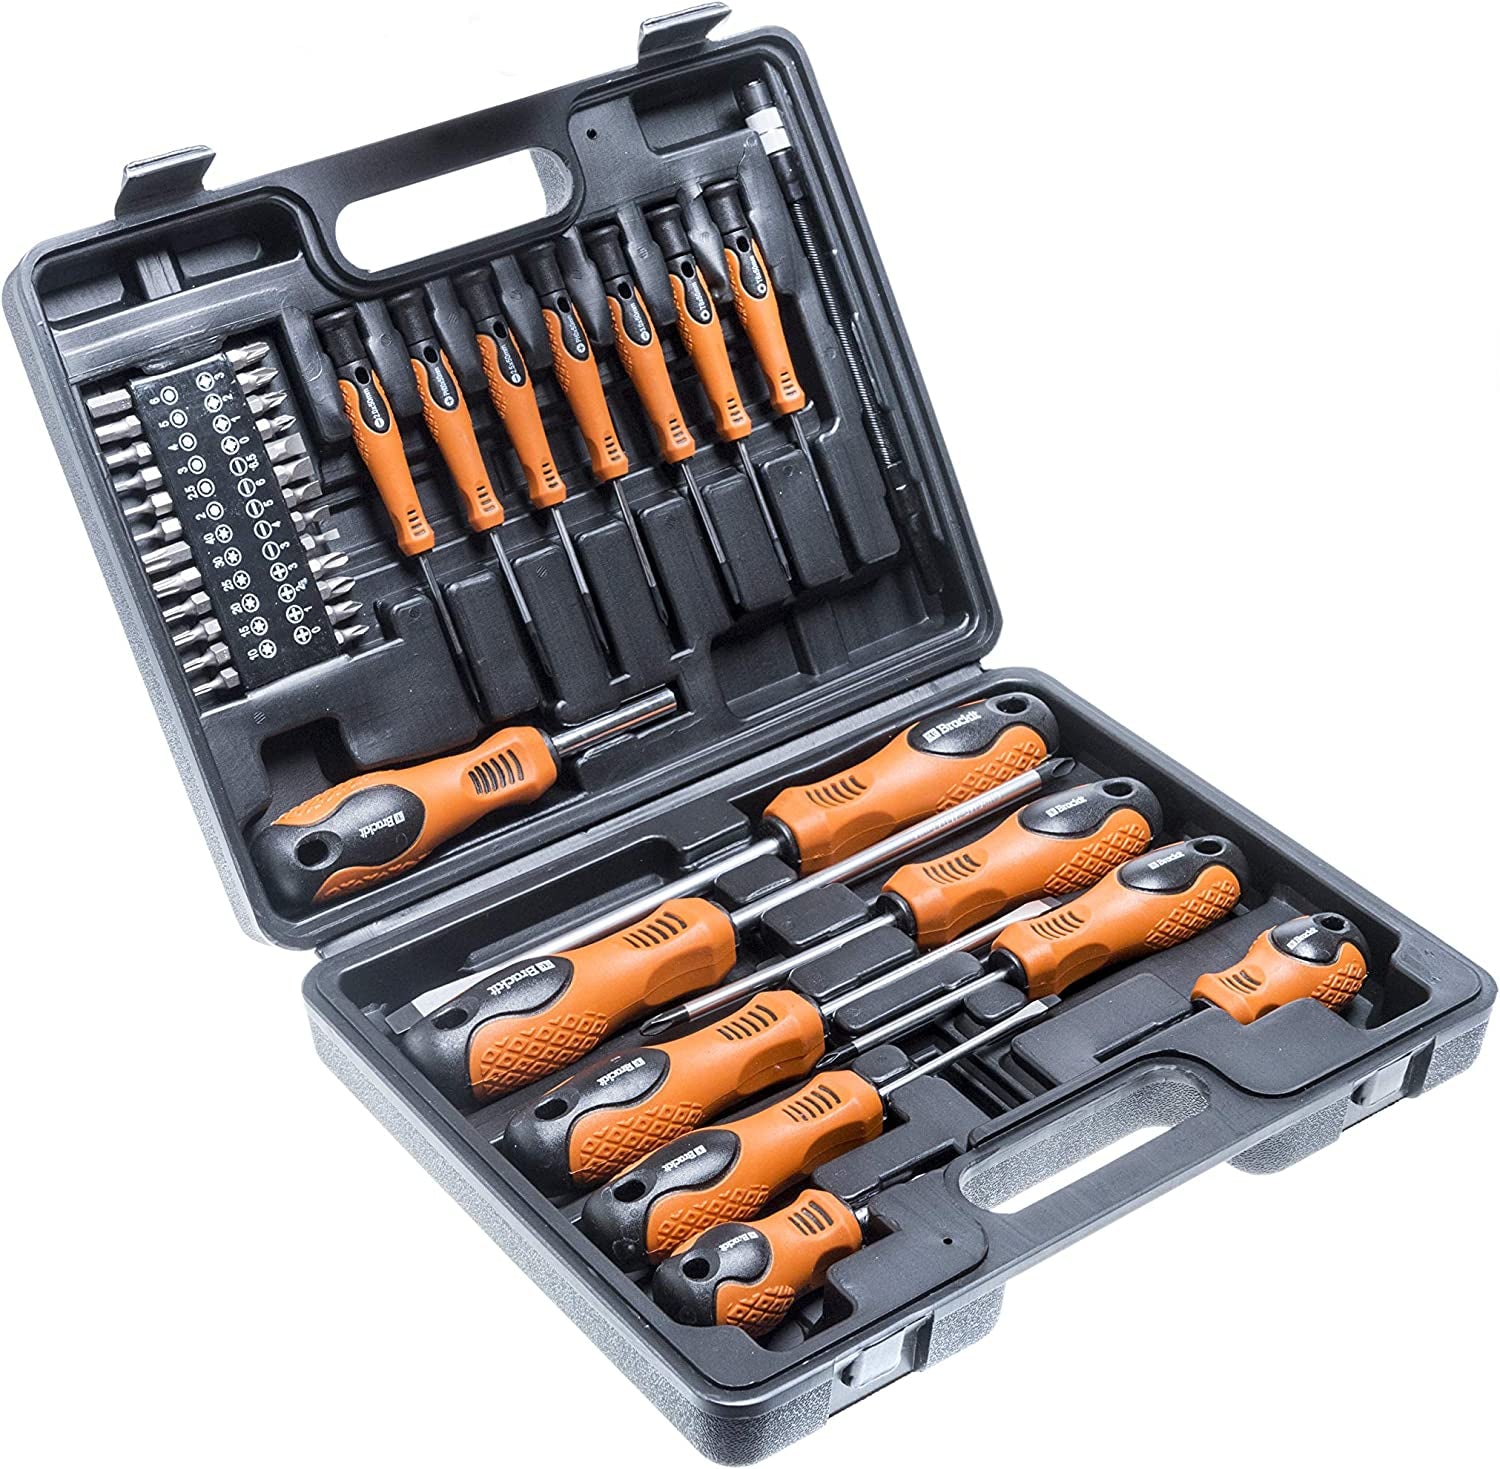 42 Pieces Premium Screwdriver Set with Magnetic Tips and Rubber Handles, Including Phillips and Flat Heads in Durable Storage Case